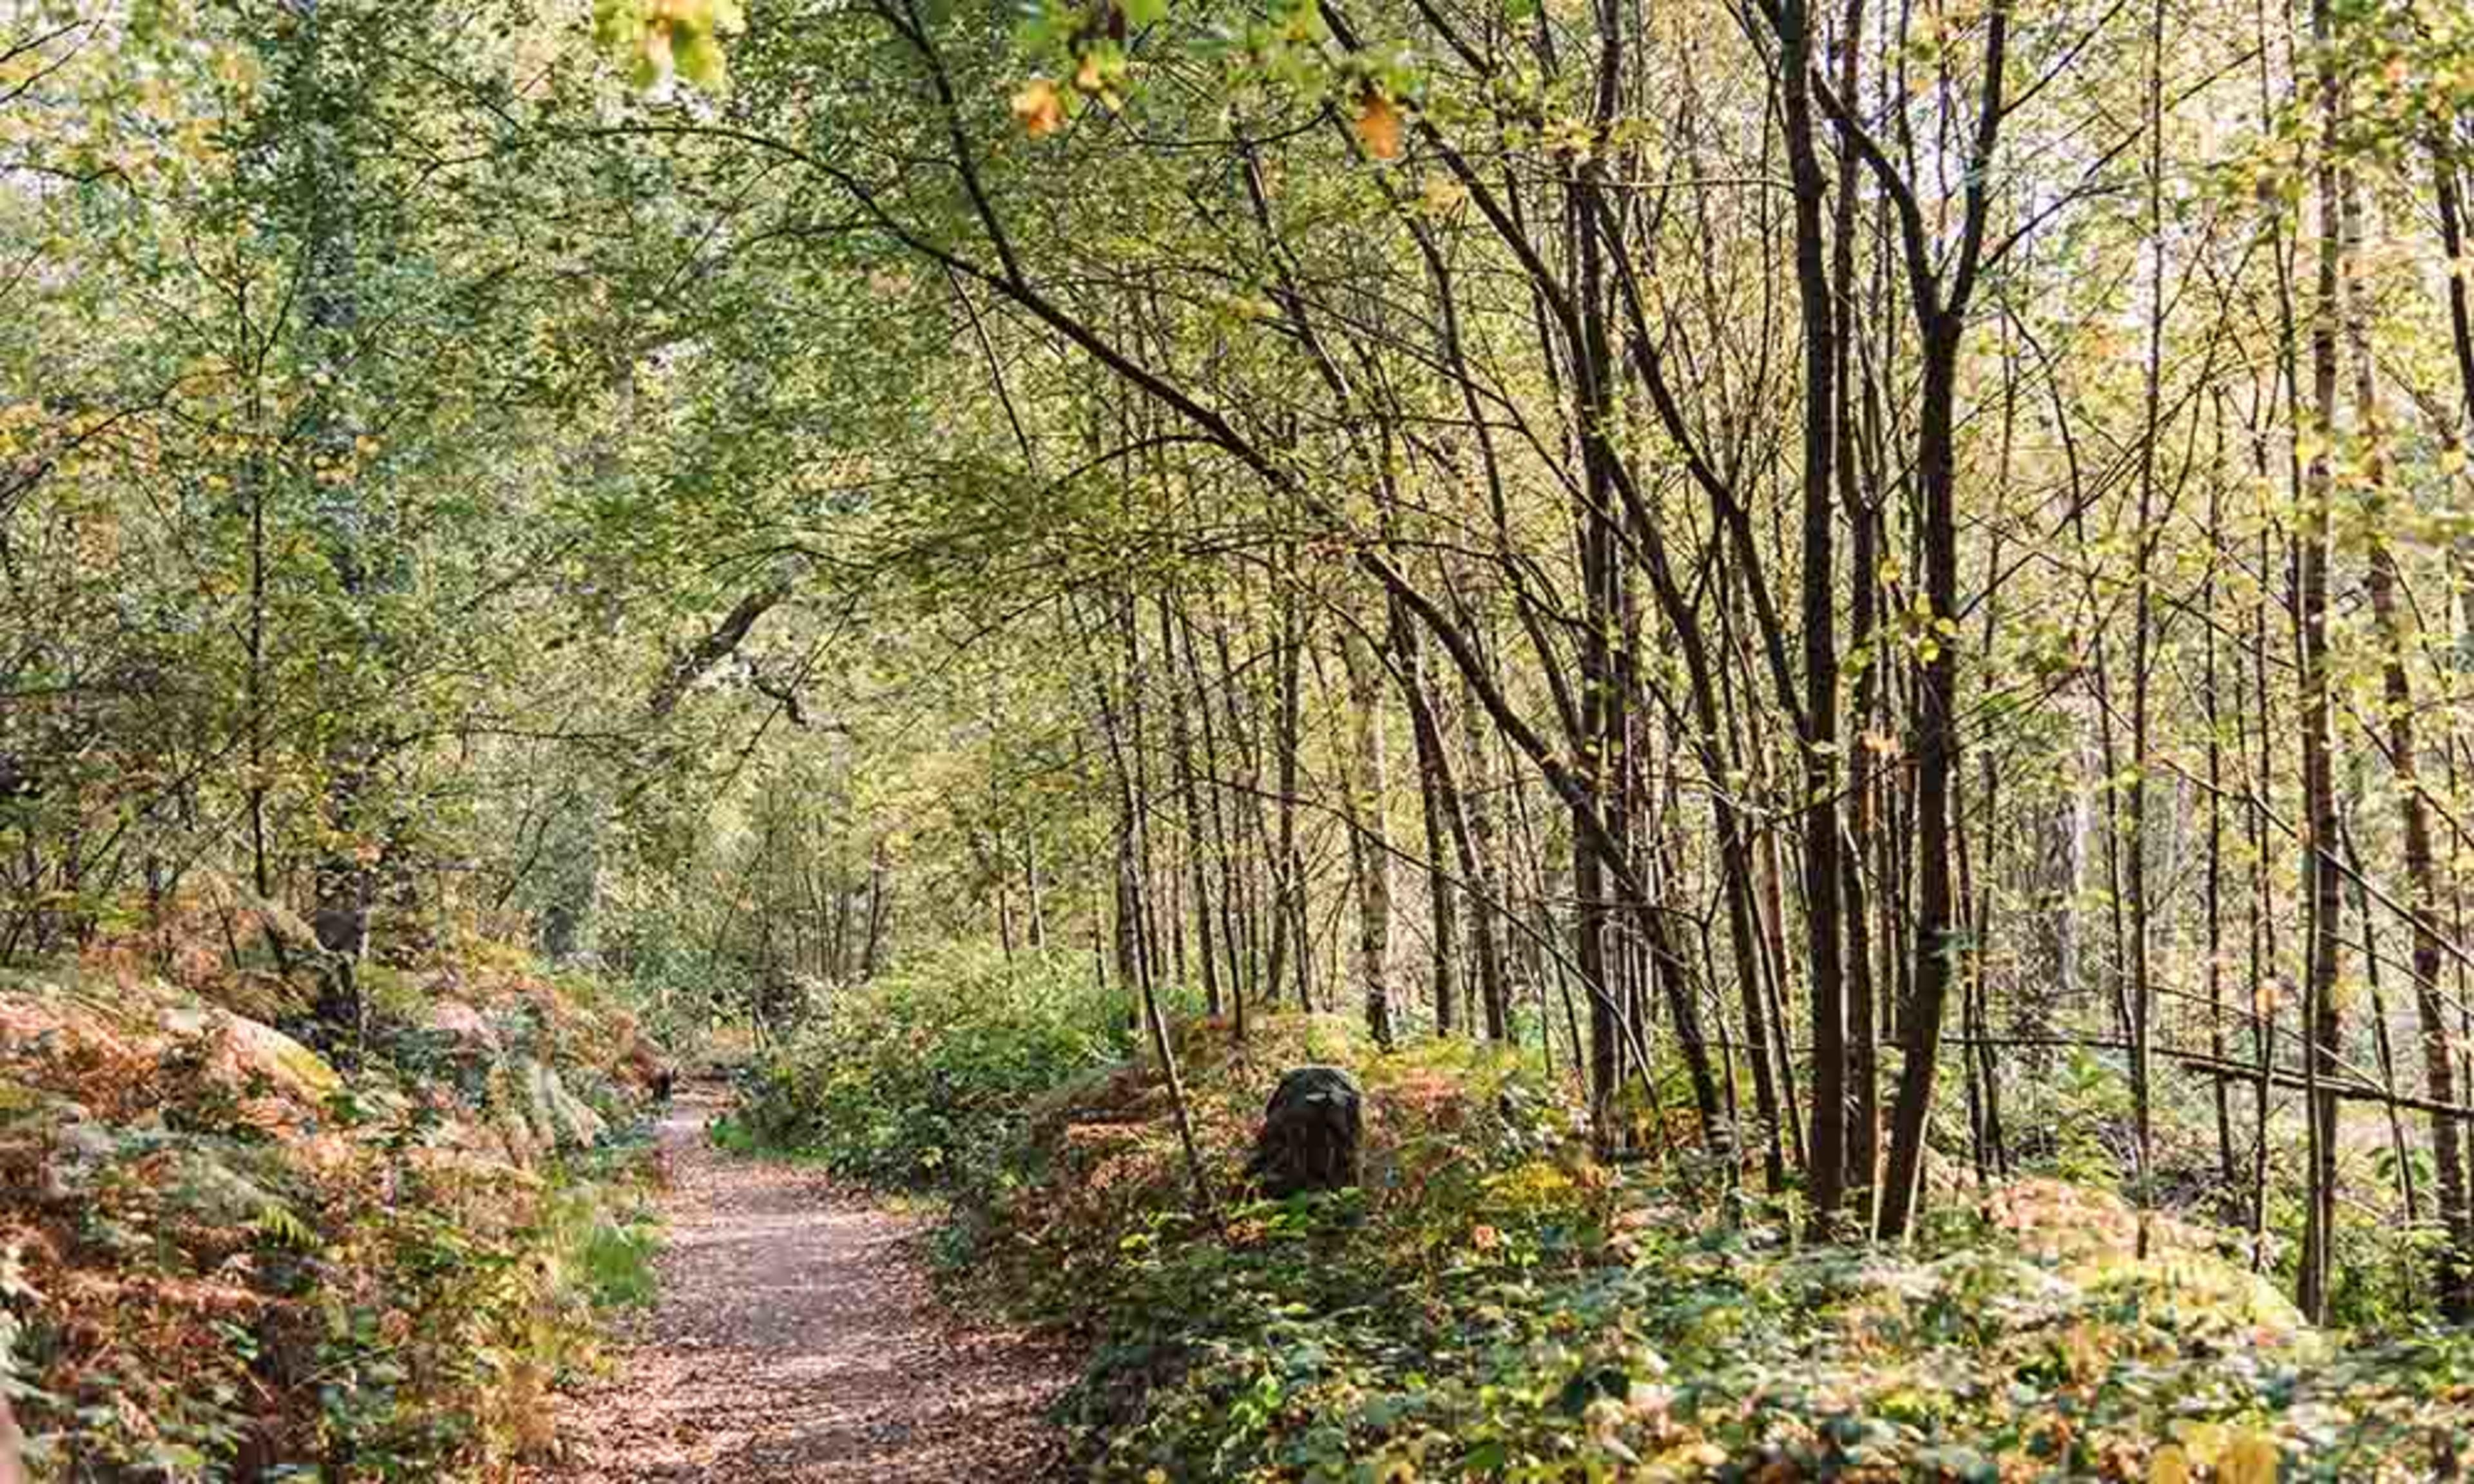 Trail leading through park, thin trees with green leaves